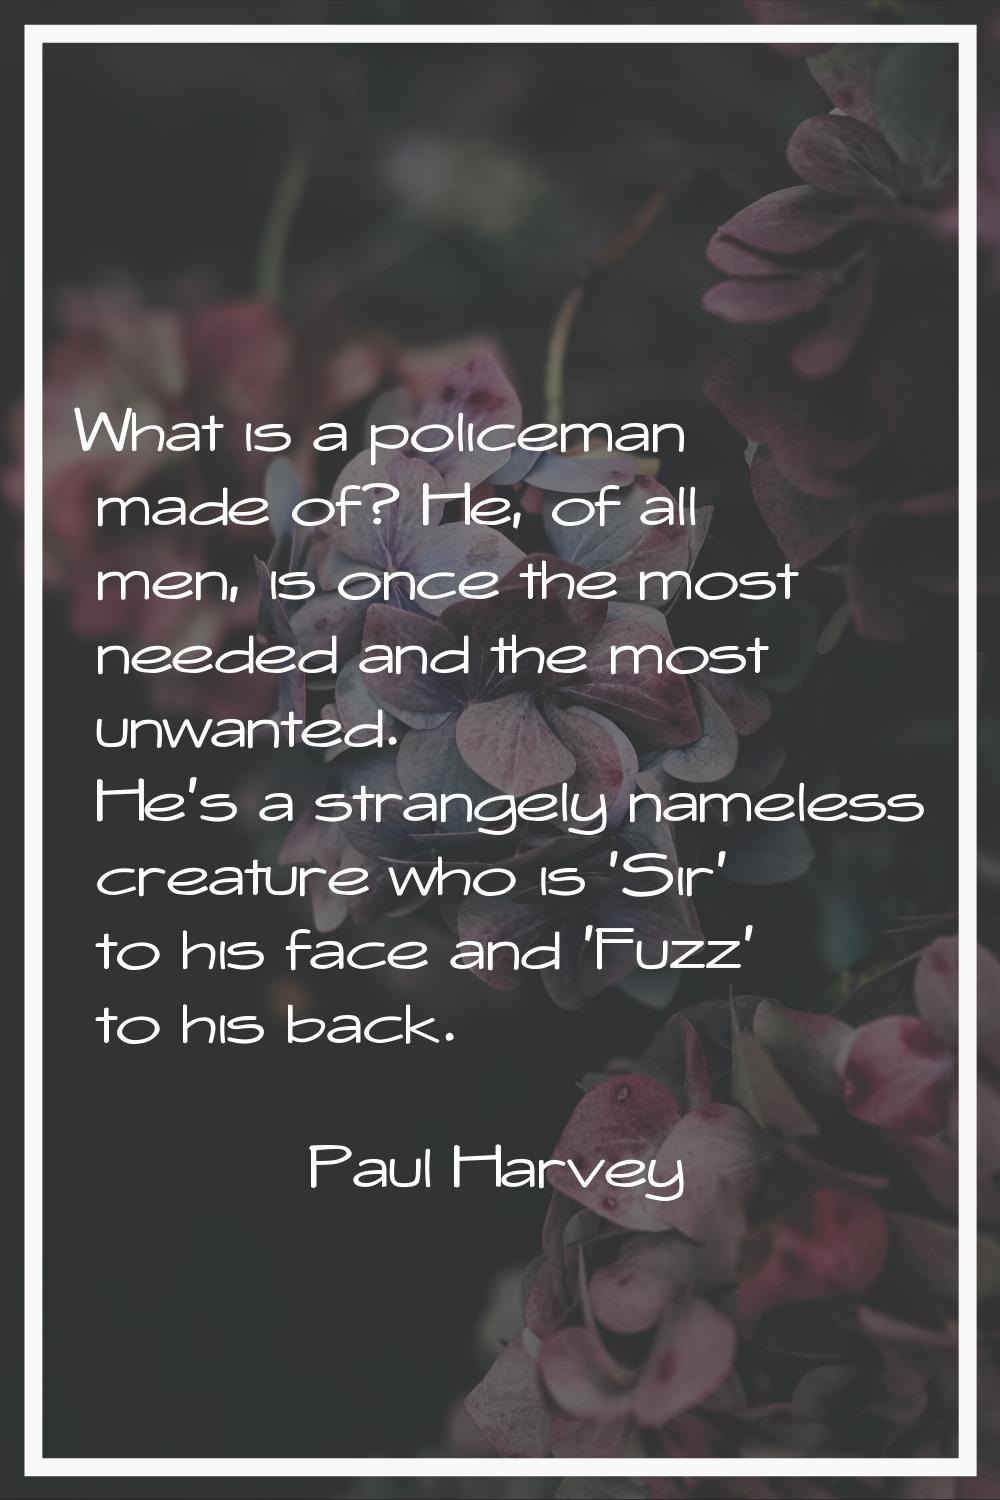 What is a policeman made of? He, of all men, is once the most needed and the most unwanted. He's a 